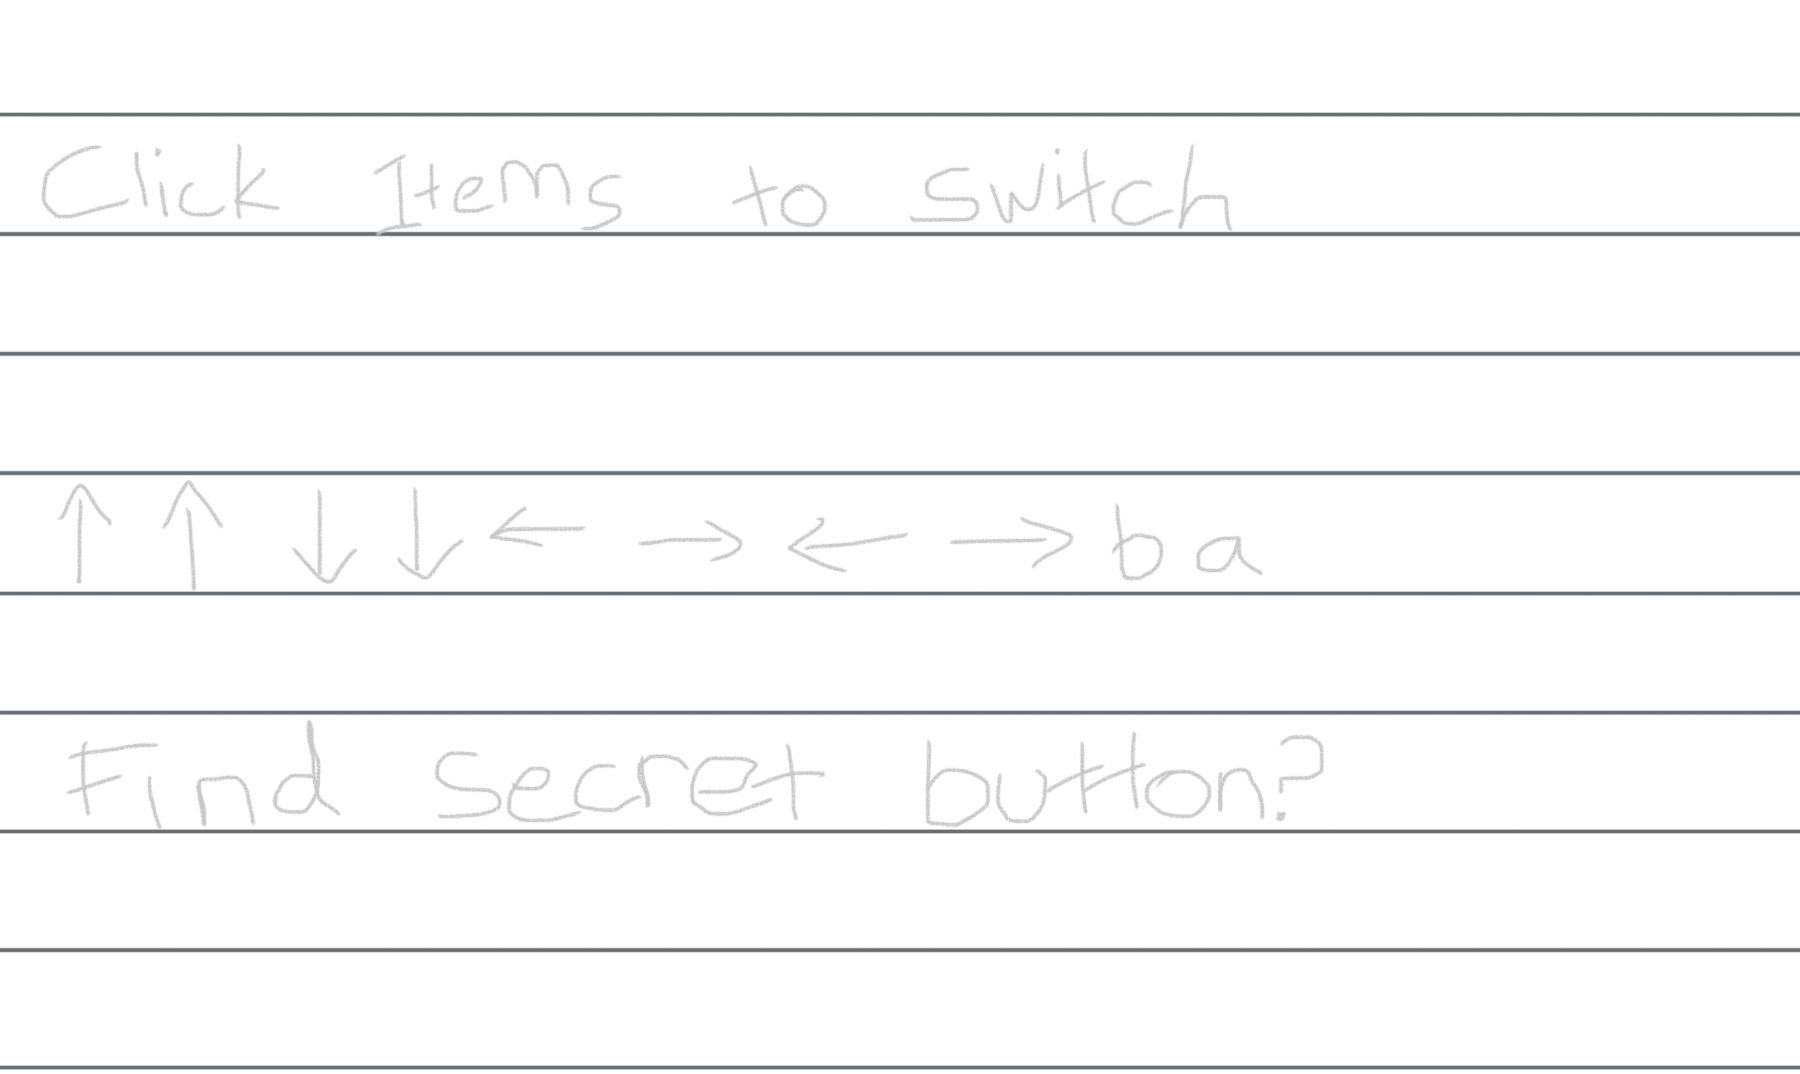 Click items to switch. Up up down down left right left right b a. Find secret button?